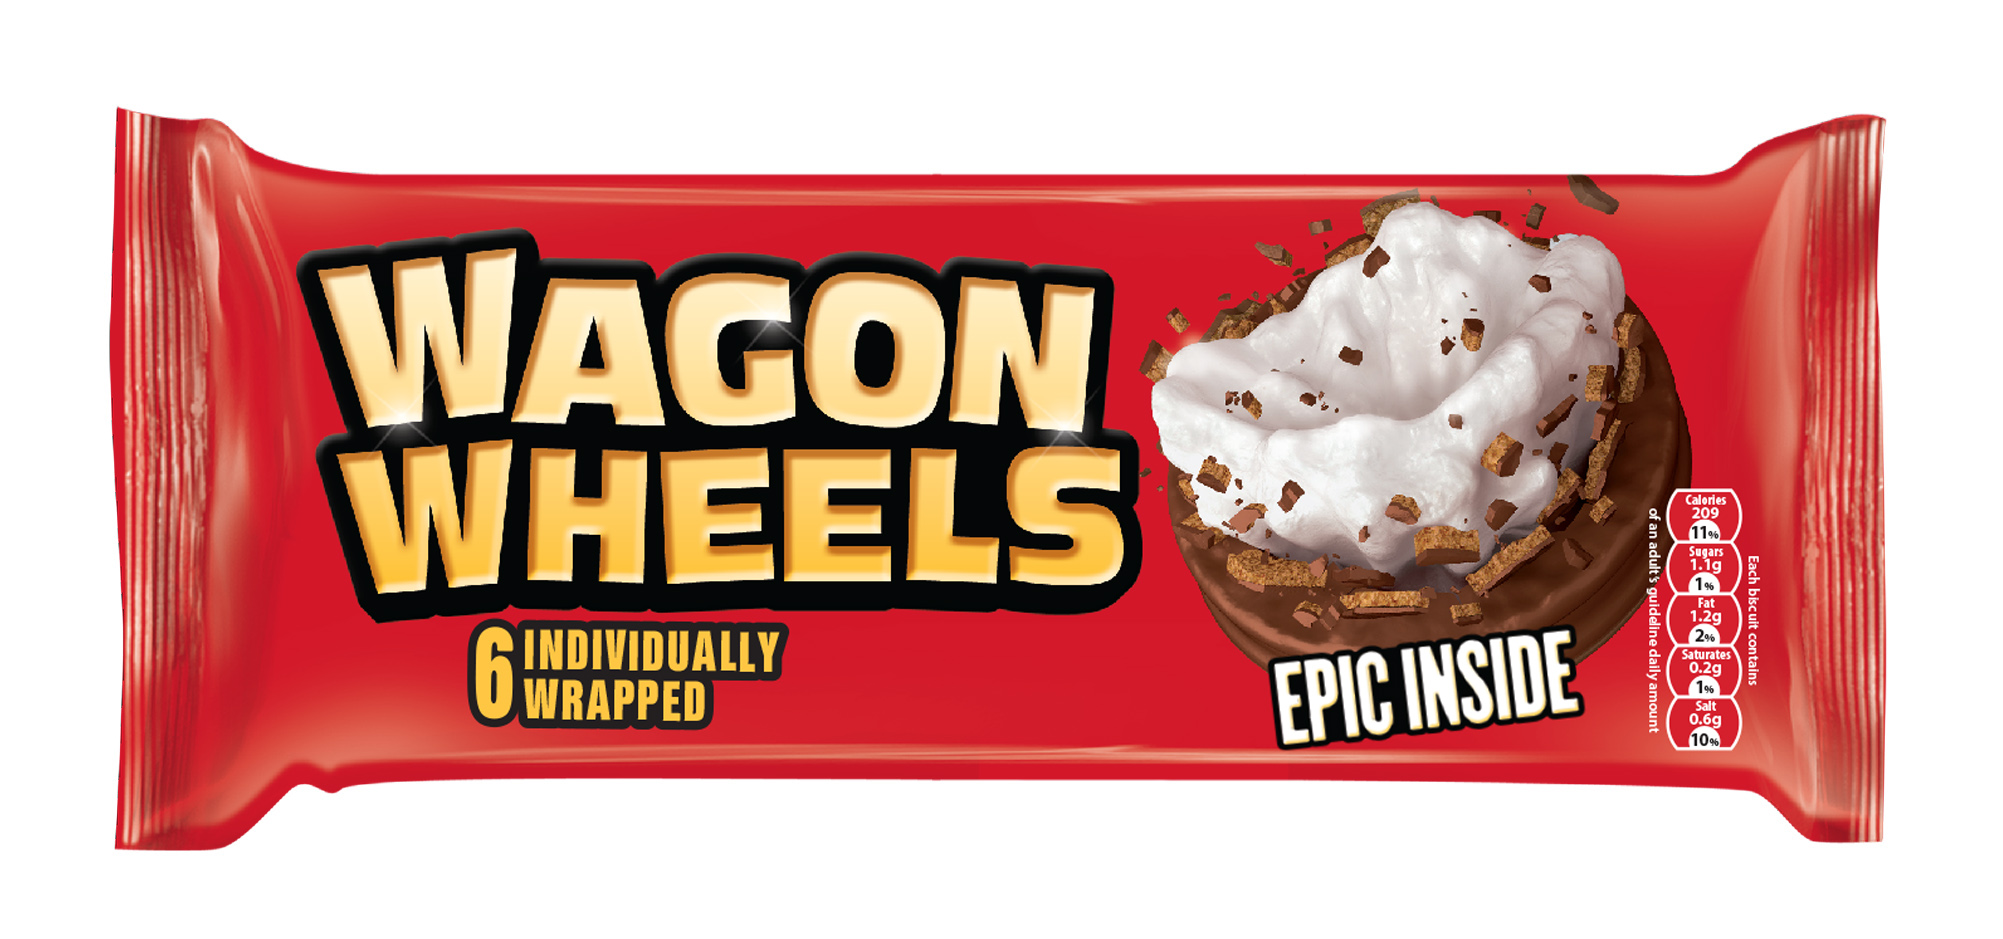 Wagon Wheels gears up to supports dads